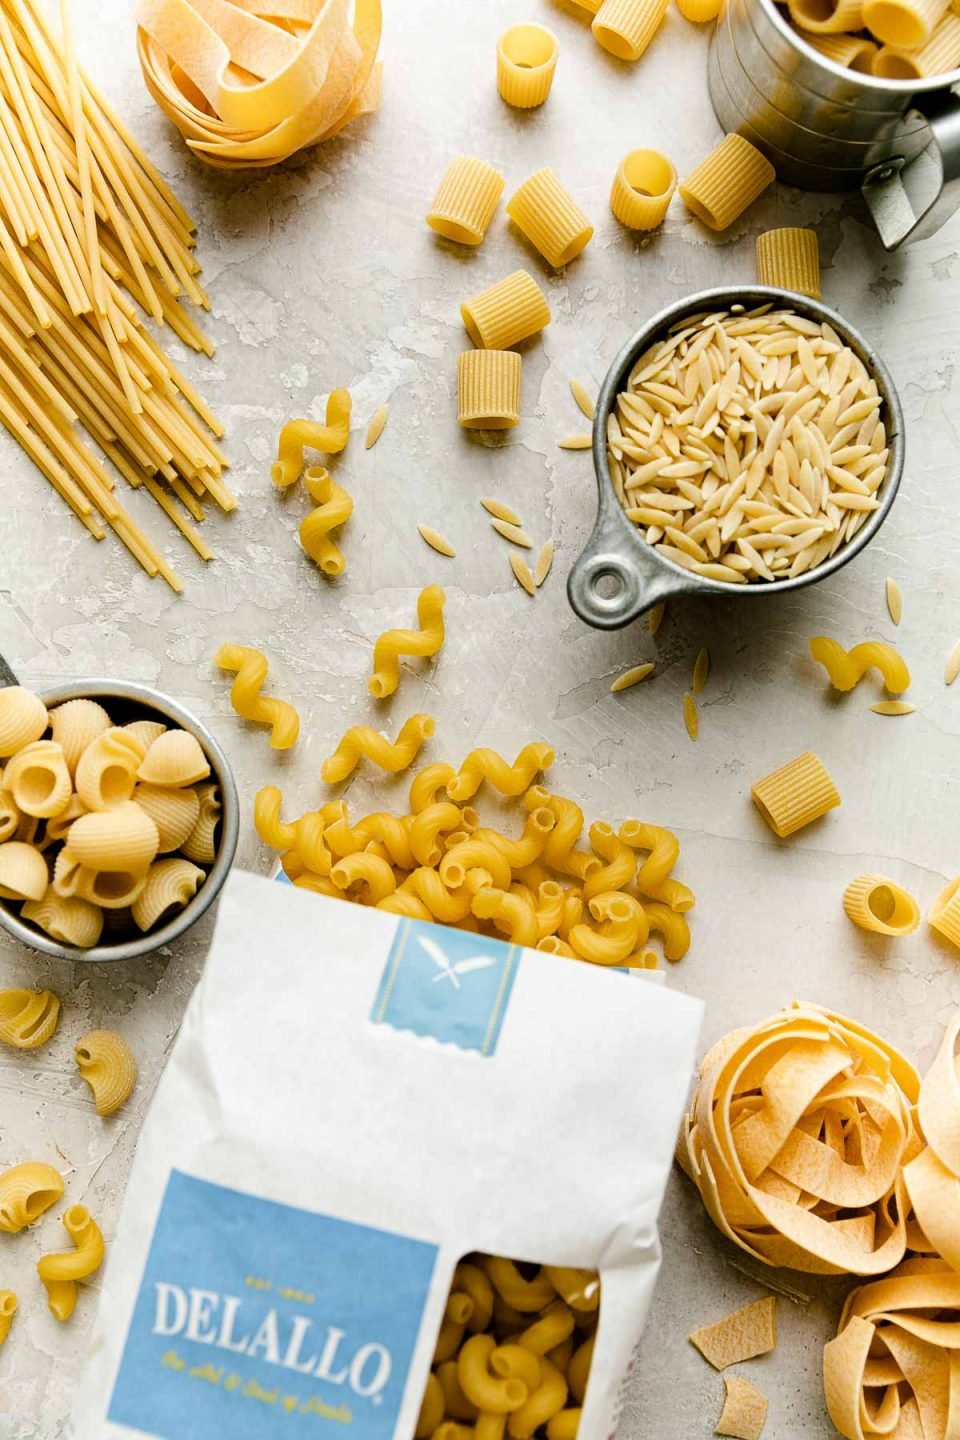 An overhead shot of raw uncooked dried pasta of different varieties: cavatappi, orzo, mezzi rigatoni, pappardelle nests, shellbows, and spaghetti from DeLallo Foods arranged on a creamy white plaster surface. The pasta is scattered about and an opened package of DeLallo dried Cavatappi pasta spills out onto the surface.